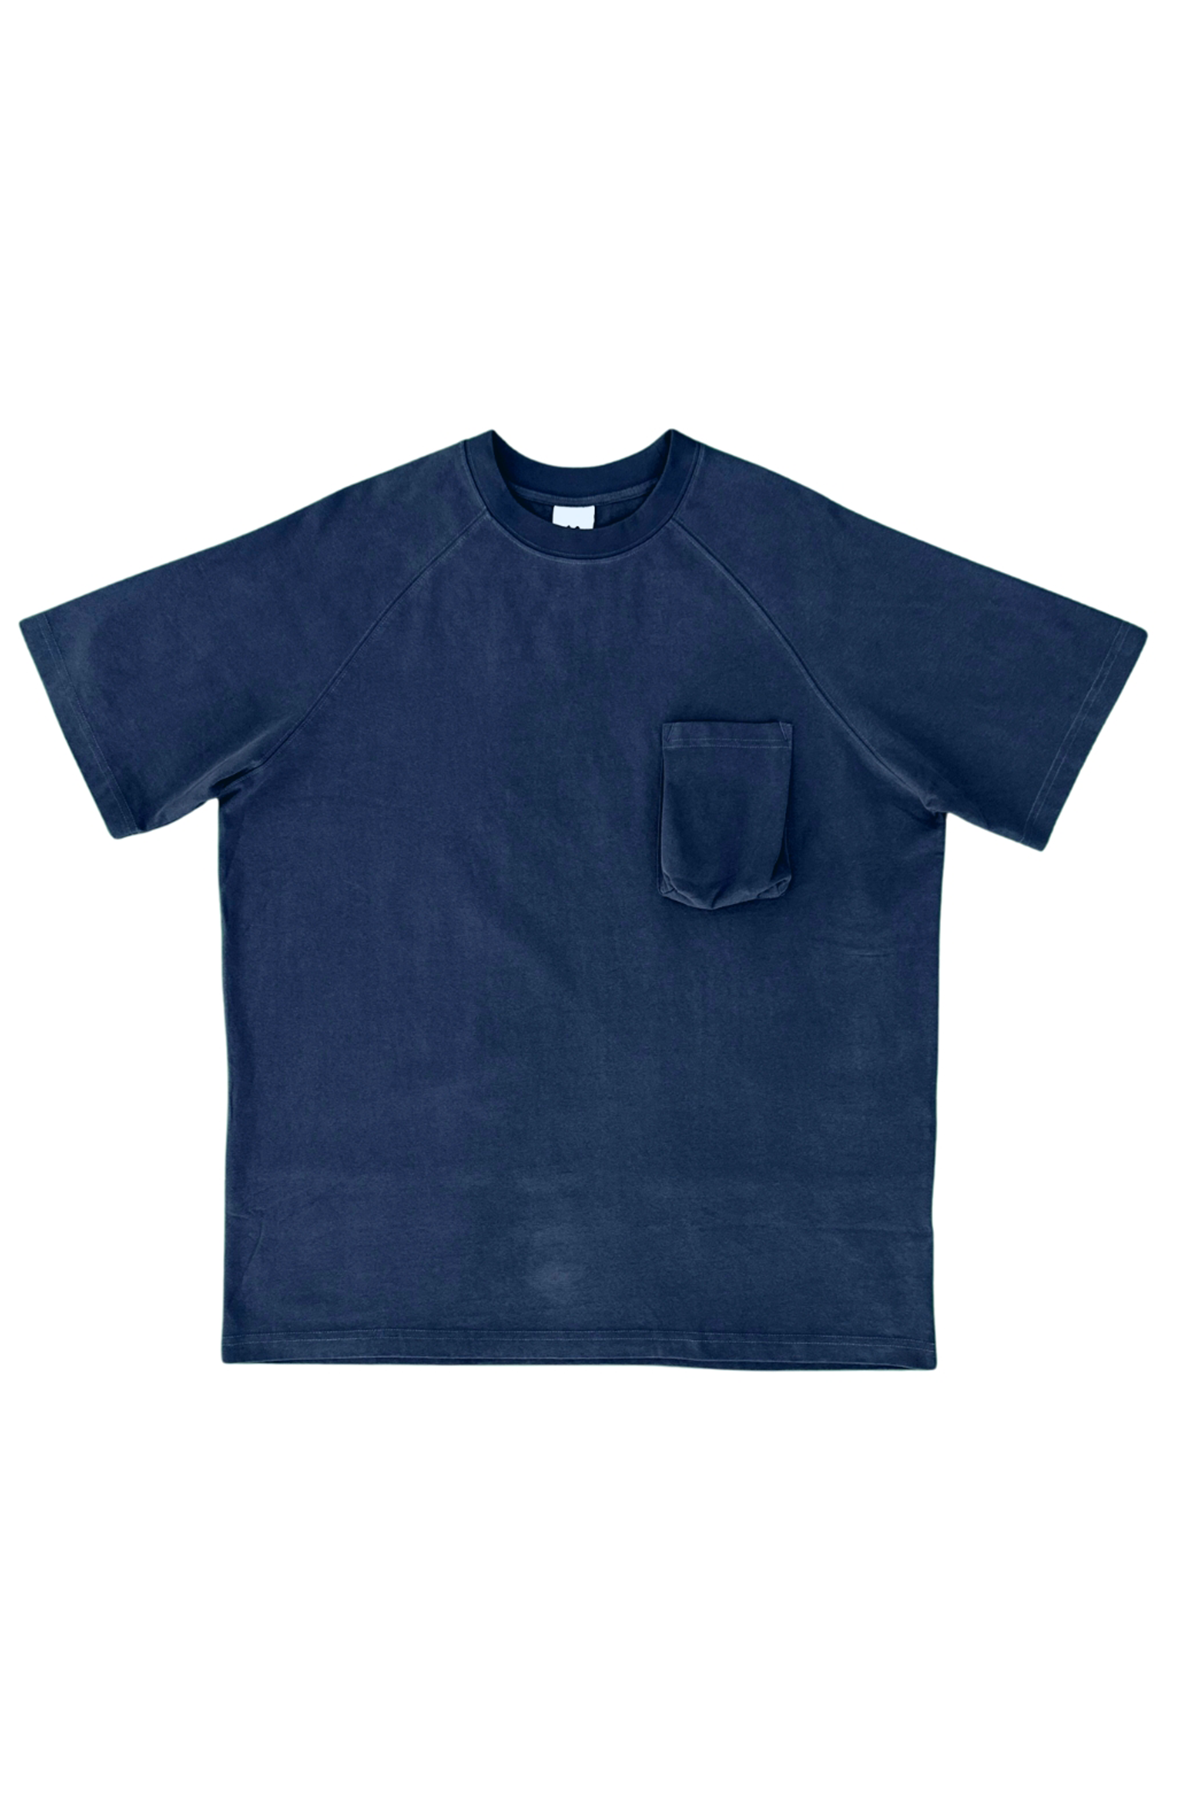 Oversized-Front-Pocket-Tee-with-Raglan-Sleeves-Unisex-Navy-Blue-Front